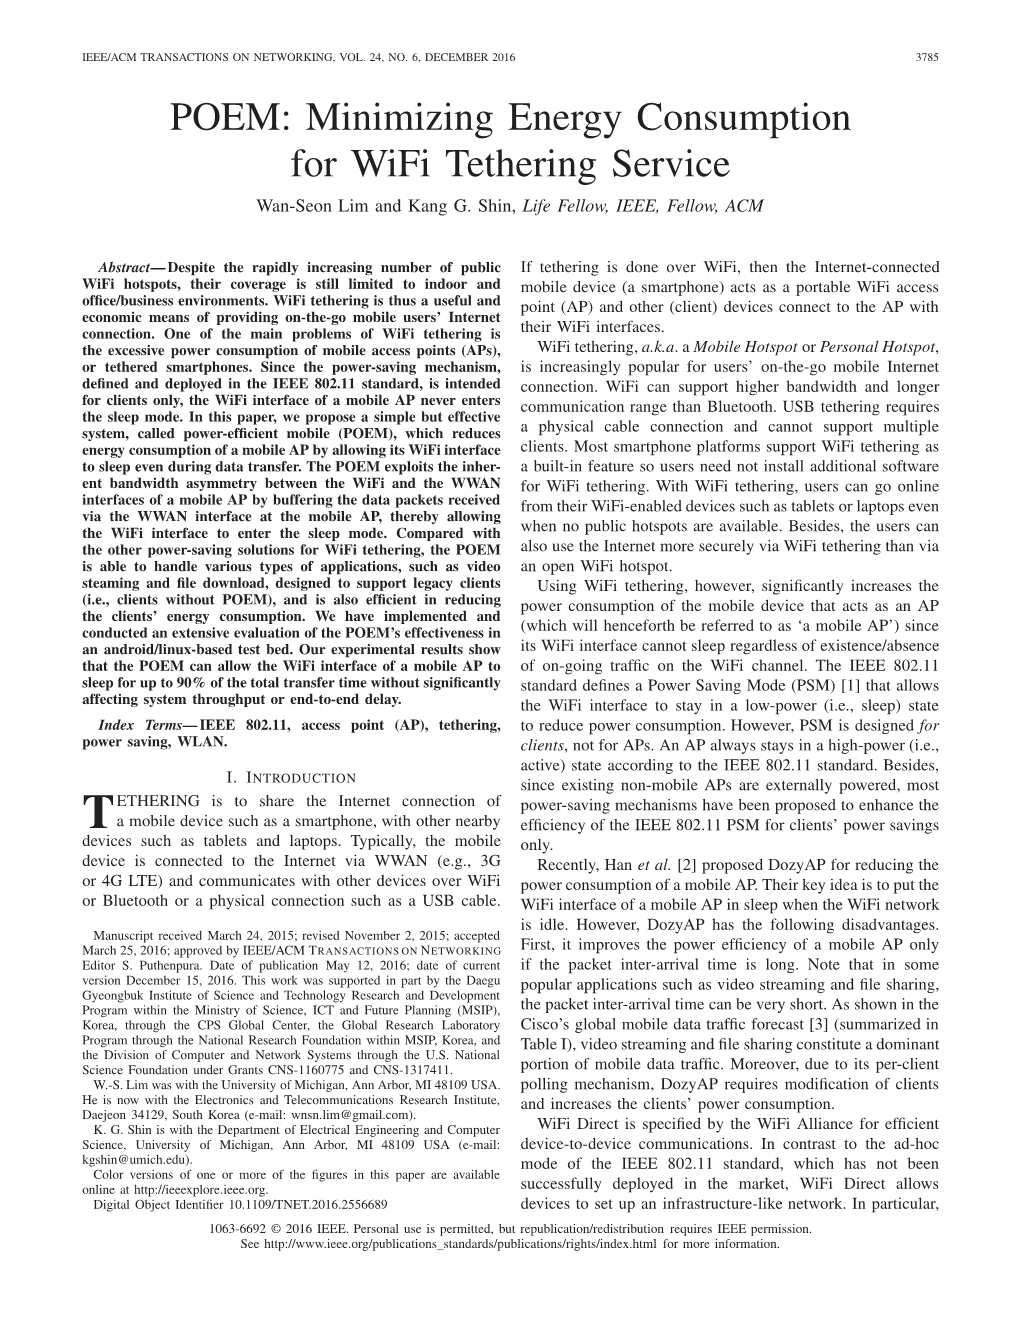 POEM: Minimizing Energy Consumption for Wifi Tethering Service Wan-Seon Lim and Kang G